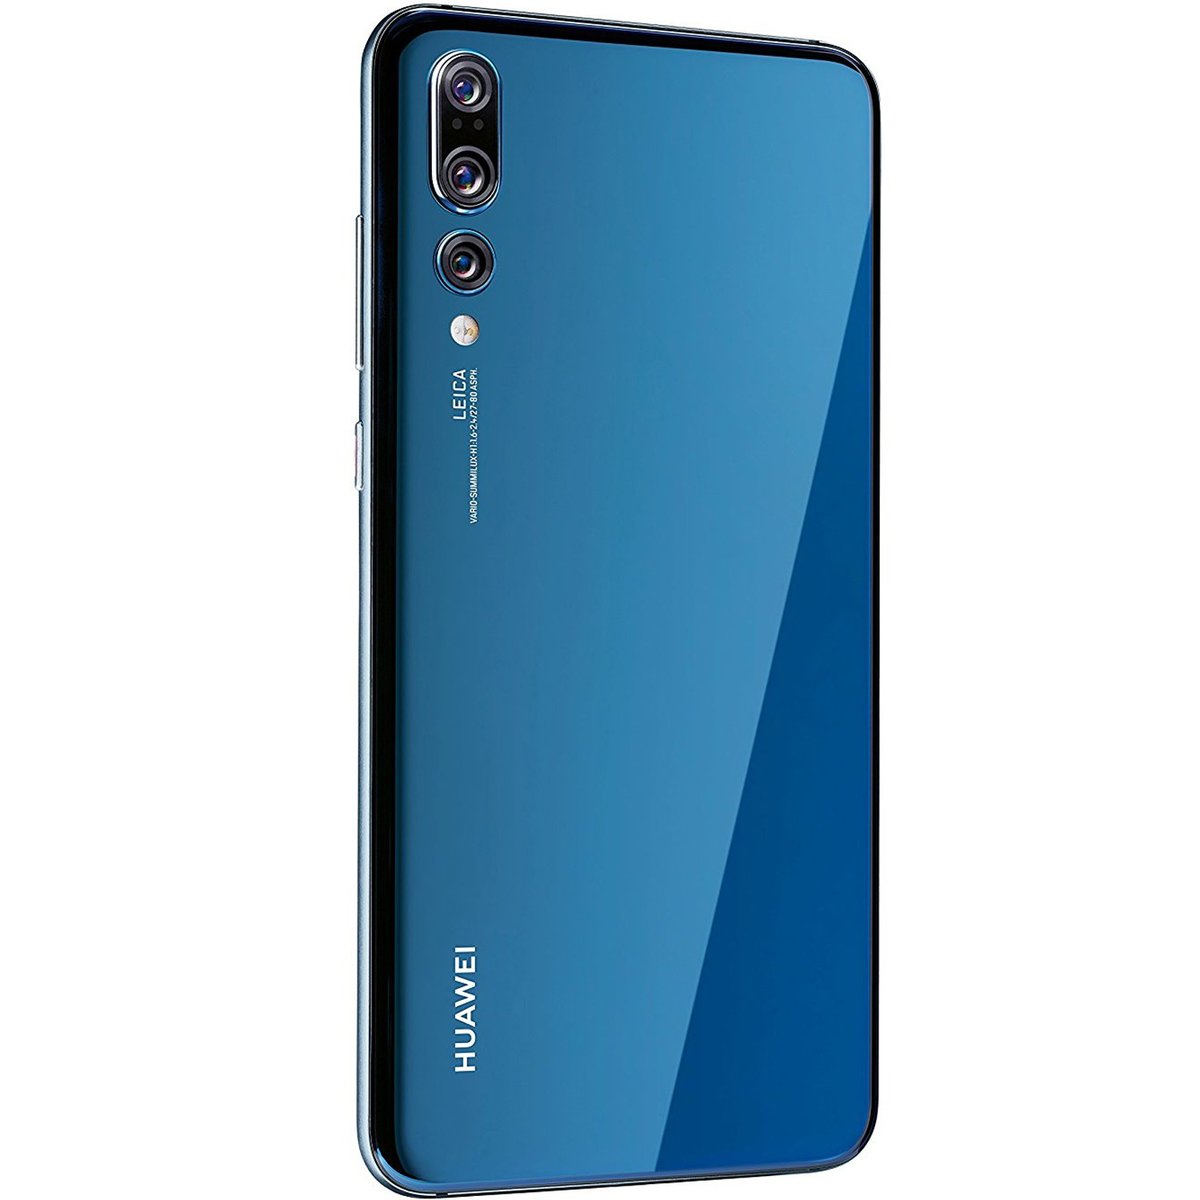 Huawei P20 Pro 128 GB, with three Leica camera lenses Blue